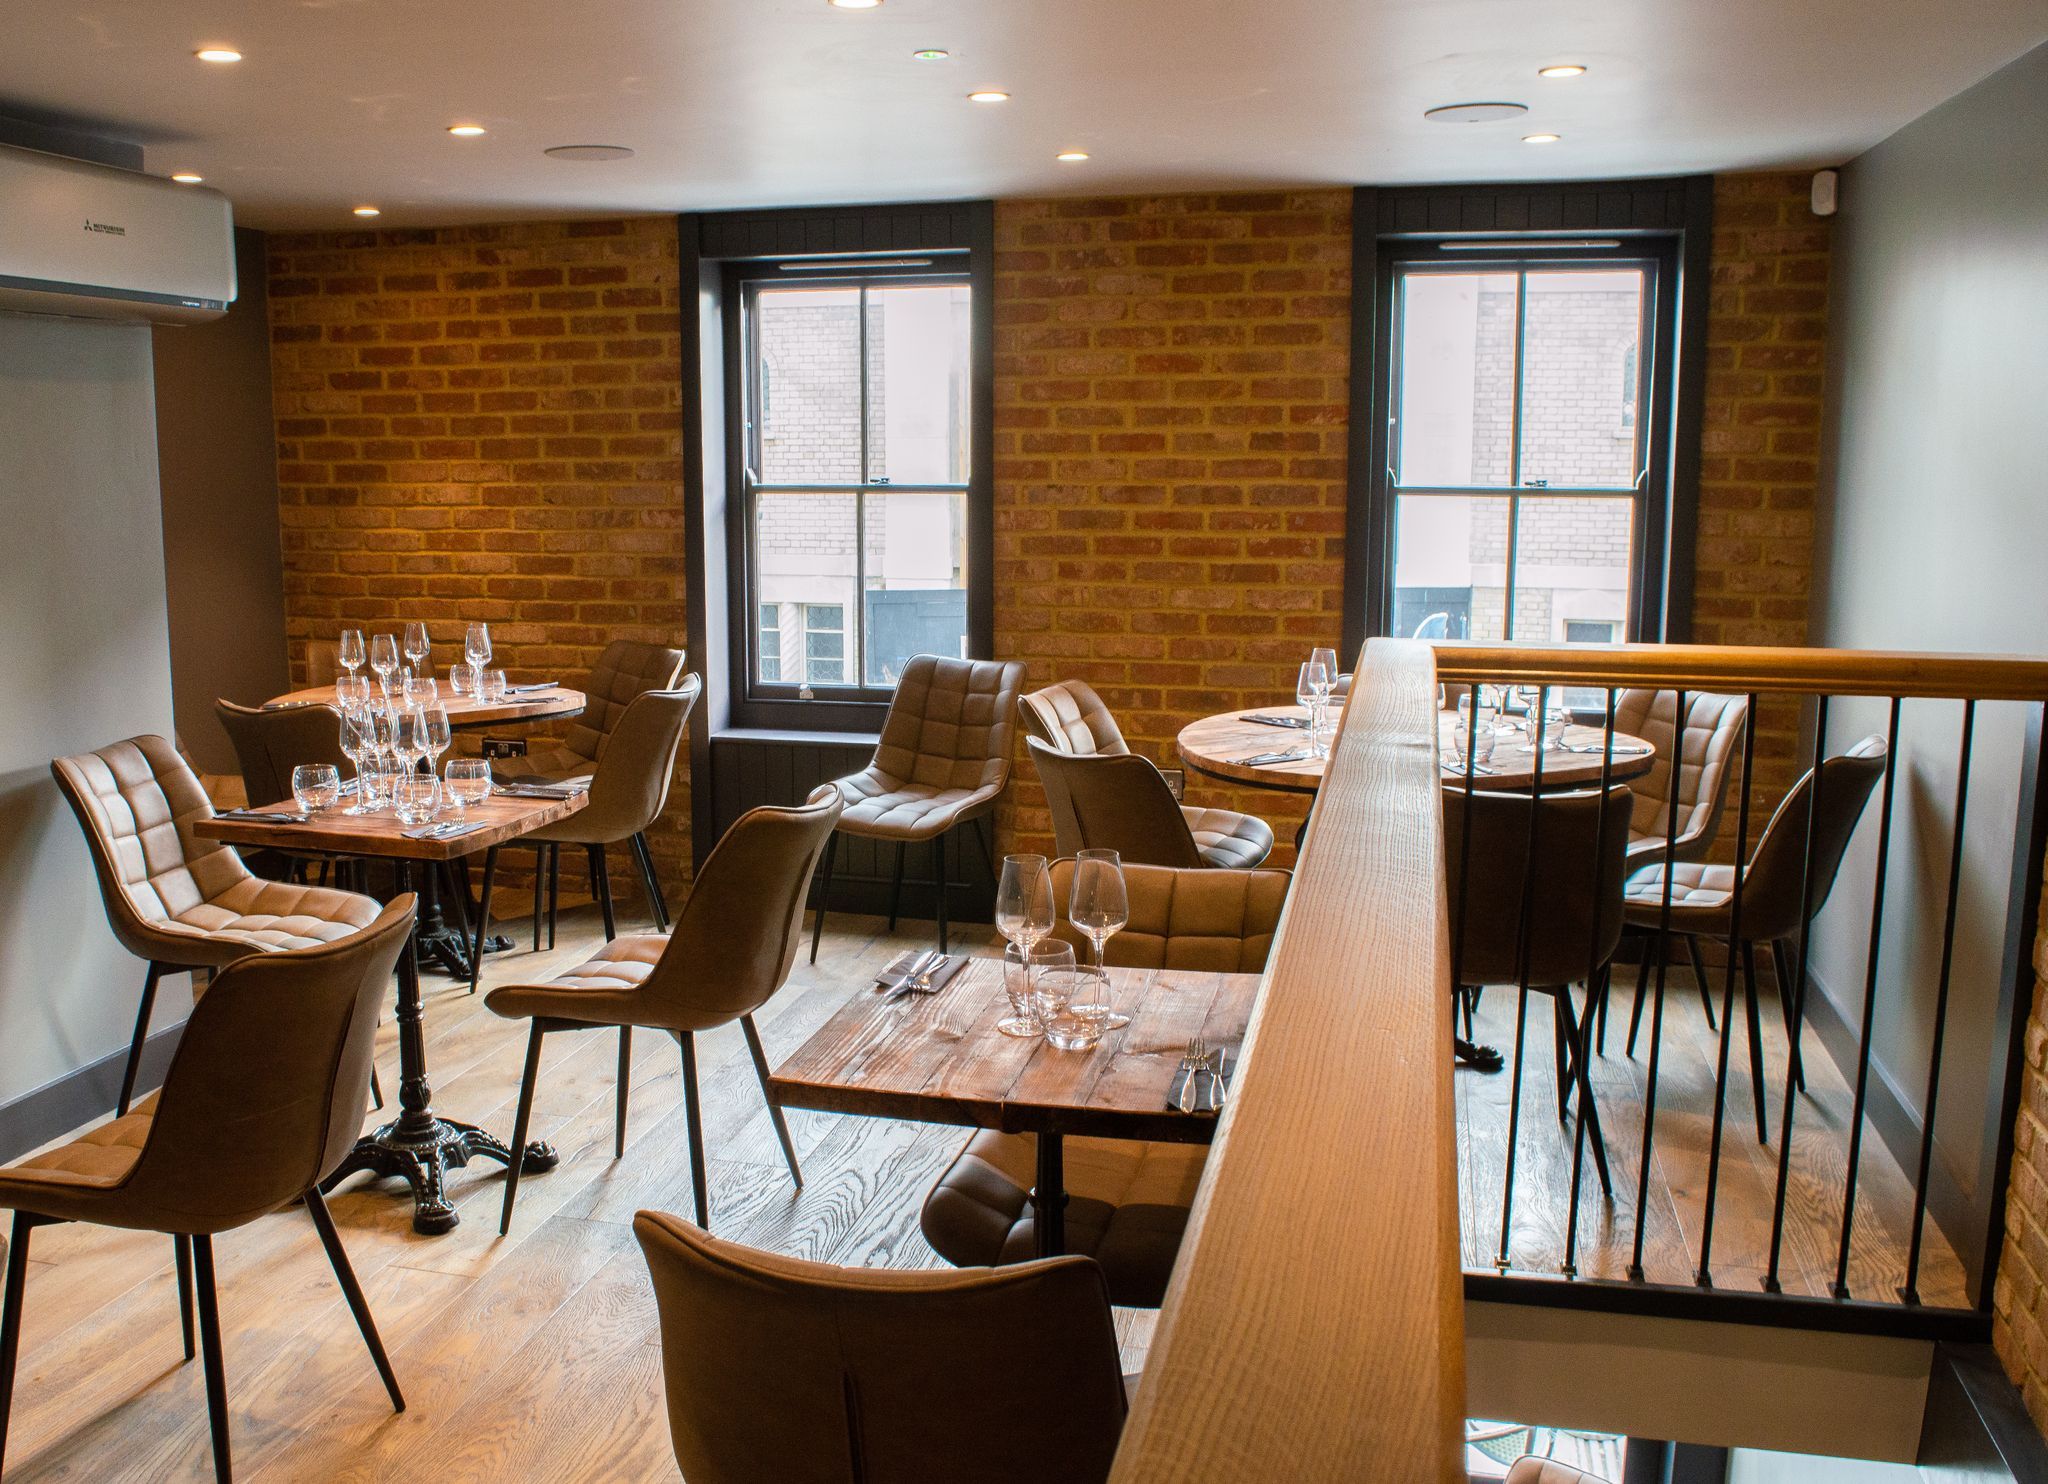 Upstairs At TEN Brighton. A redbrick wall looks out onto a street, wooden tables set with tableware and deep brown leather seats